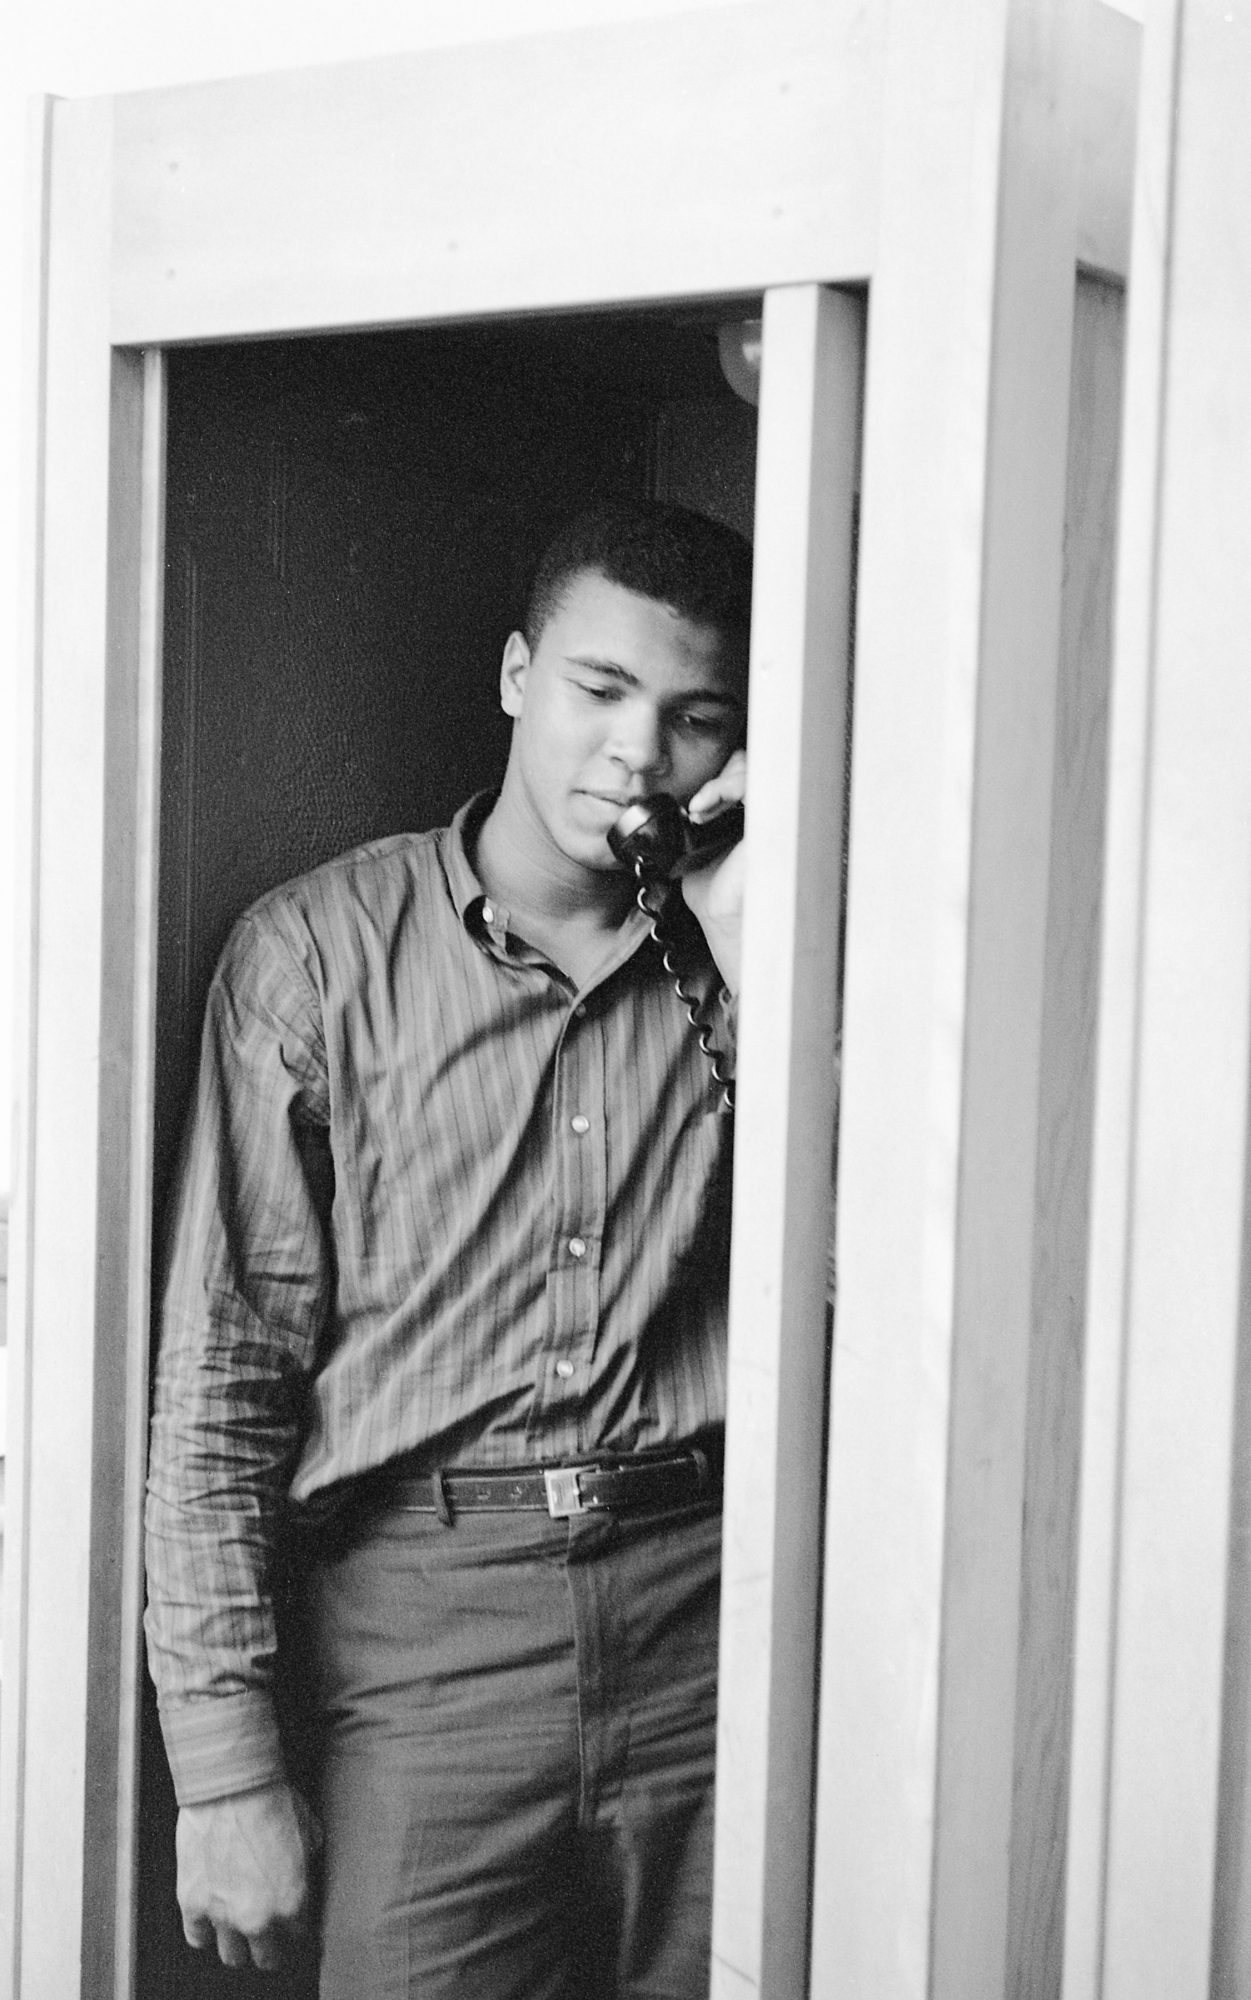 LOS ANGELES, CA - OCTOBER, 1962: Cassius Clay, between training sets talks on the phone at the Main Street Gym preparing for his bout against Archie Moore, October, 1962 in Los Angeles, California. (Photo by Stanley Weston/Getty Images)